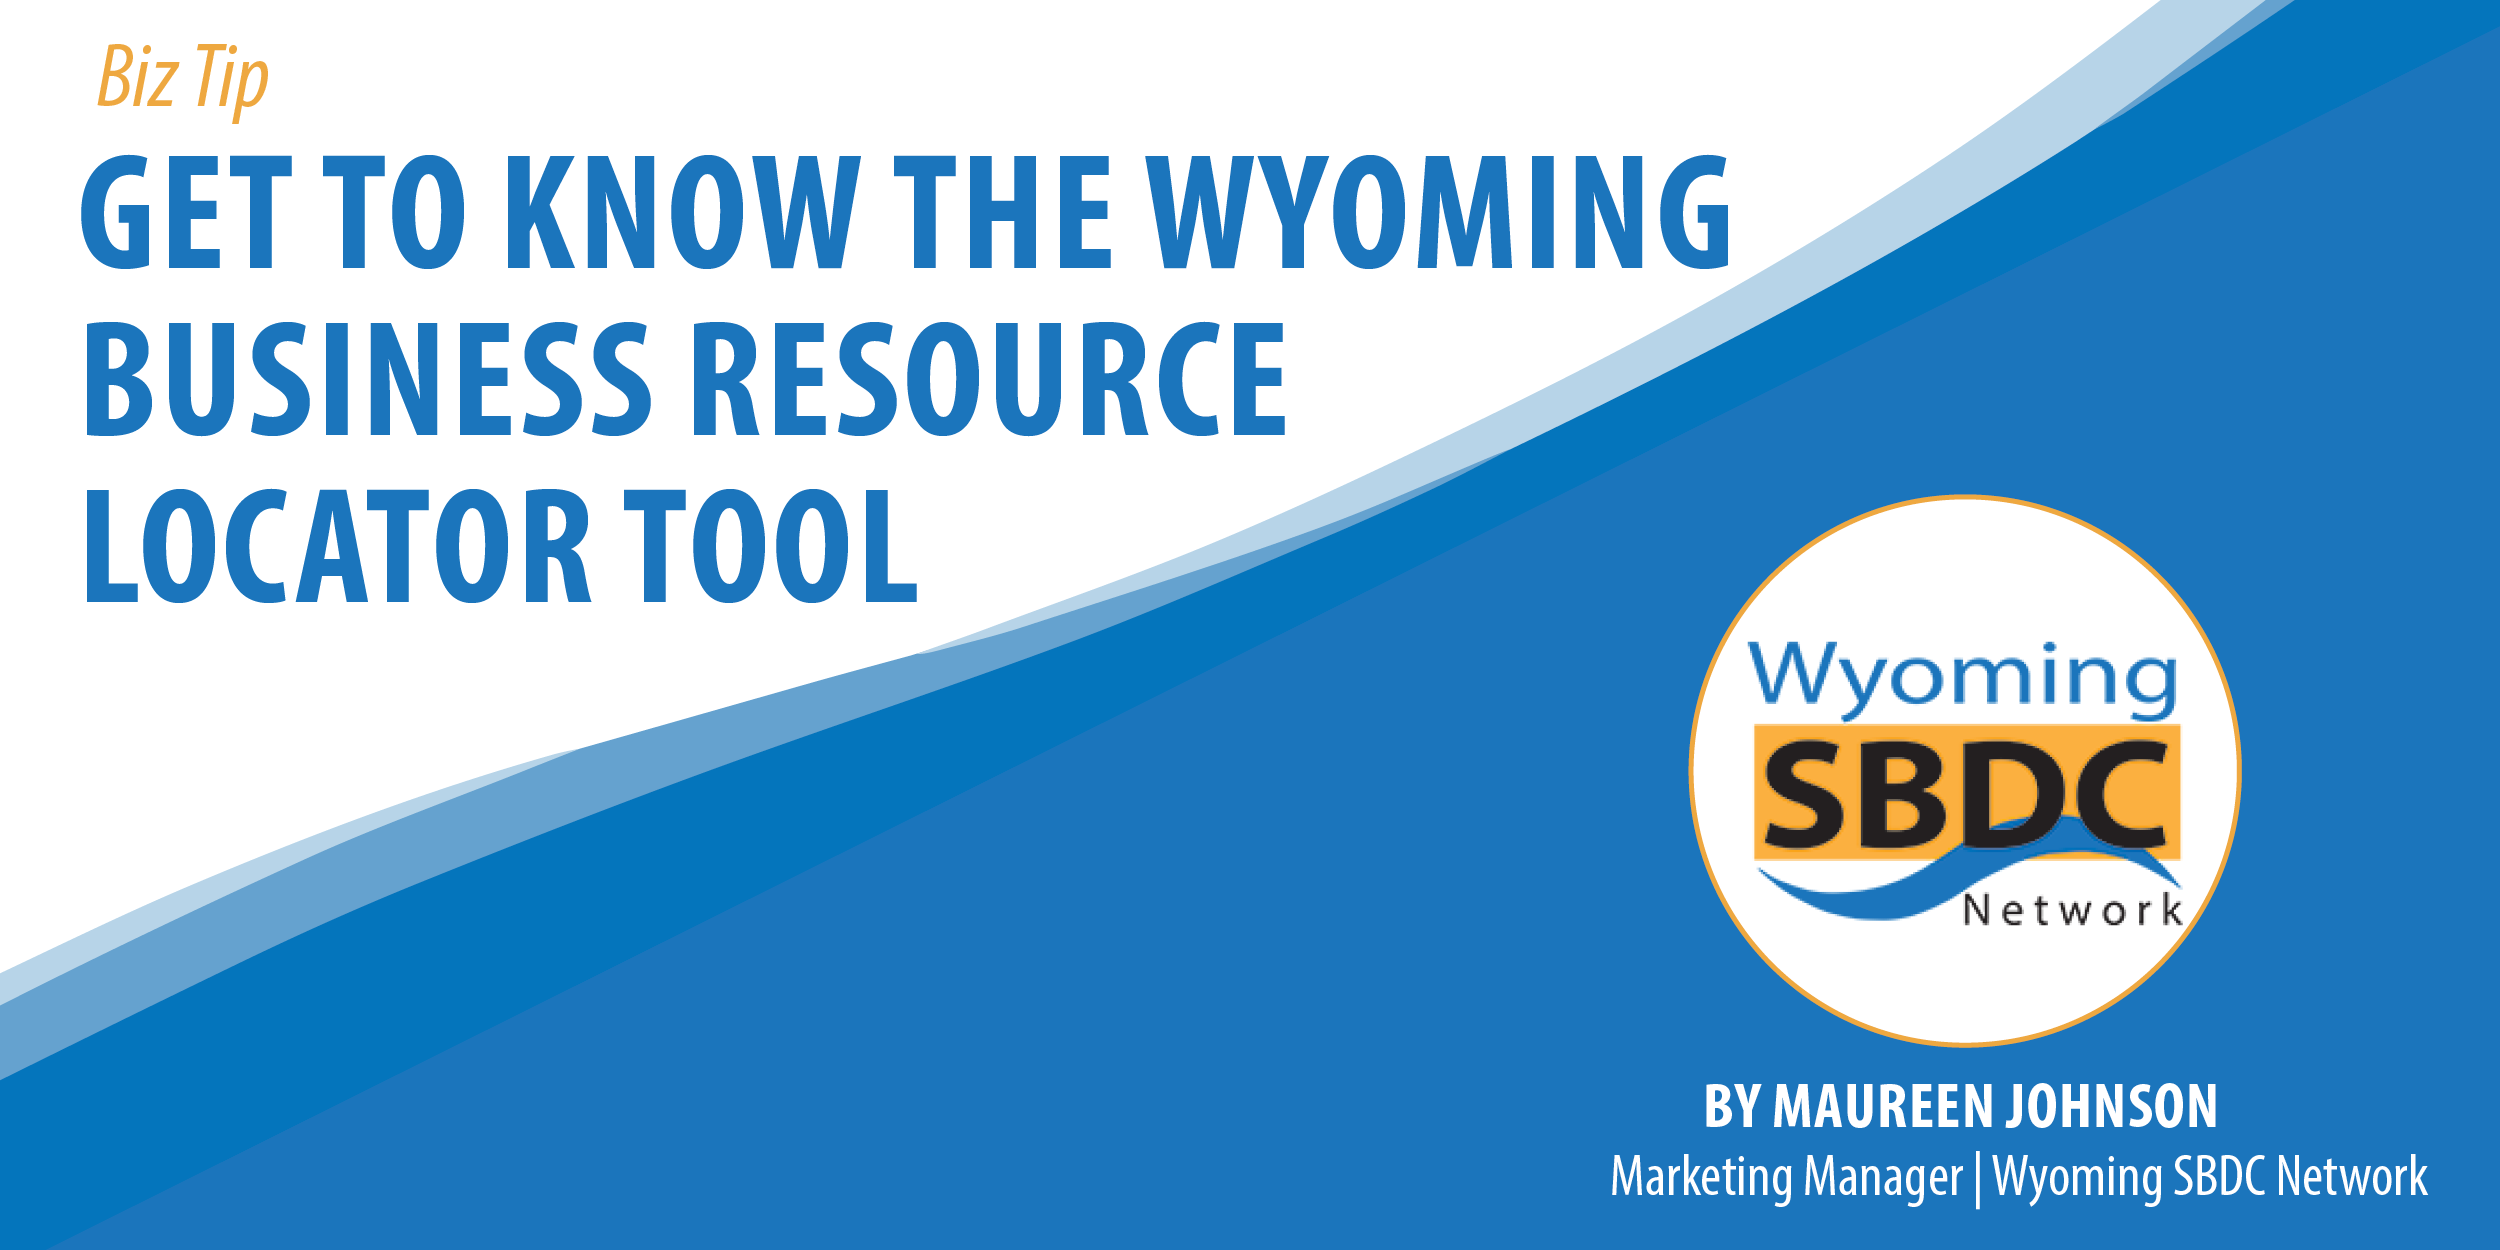 Get To Know The Wyoming Business Resource Locator Tool